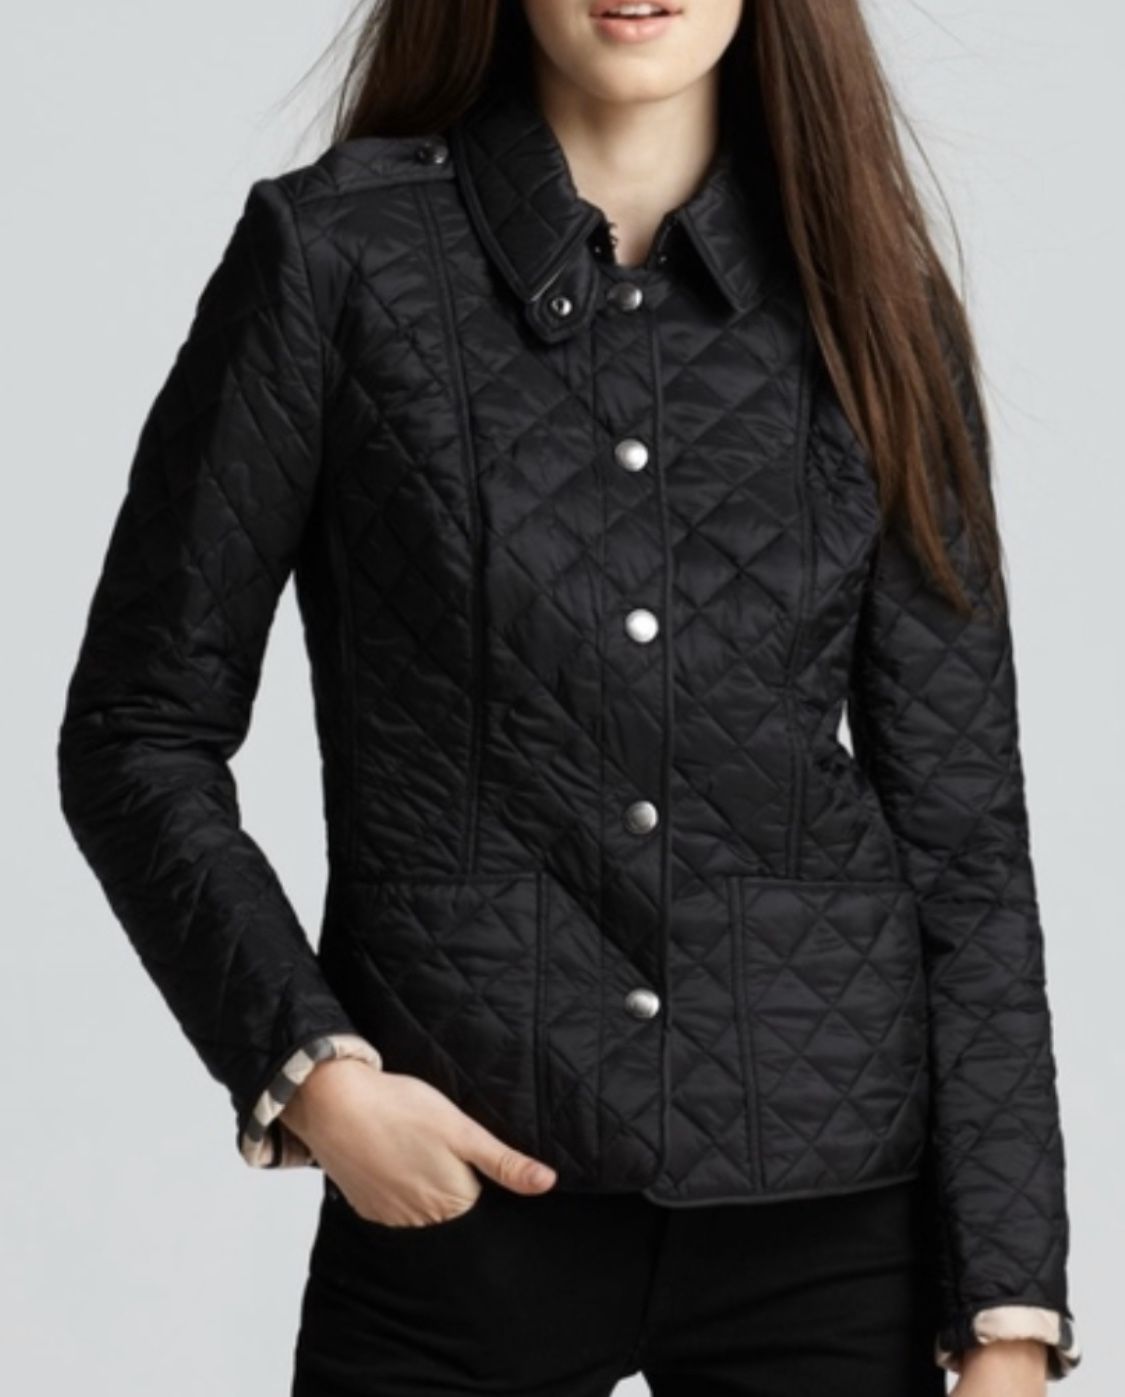 Burberry Women’s Quilted Snap Jacket